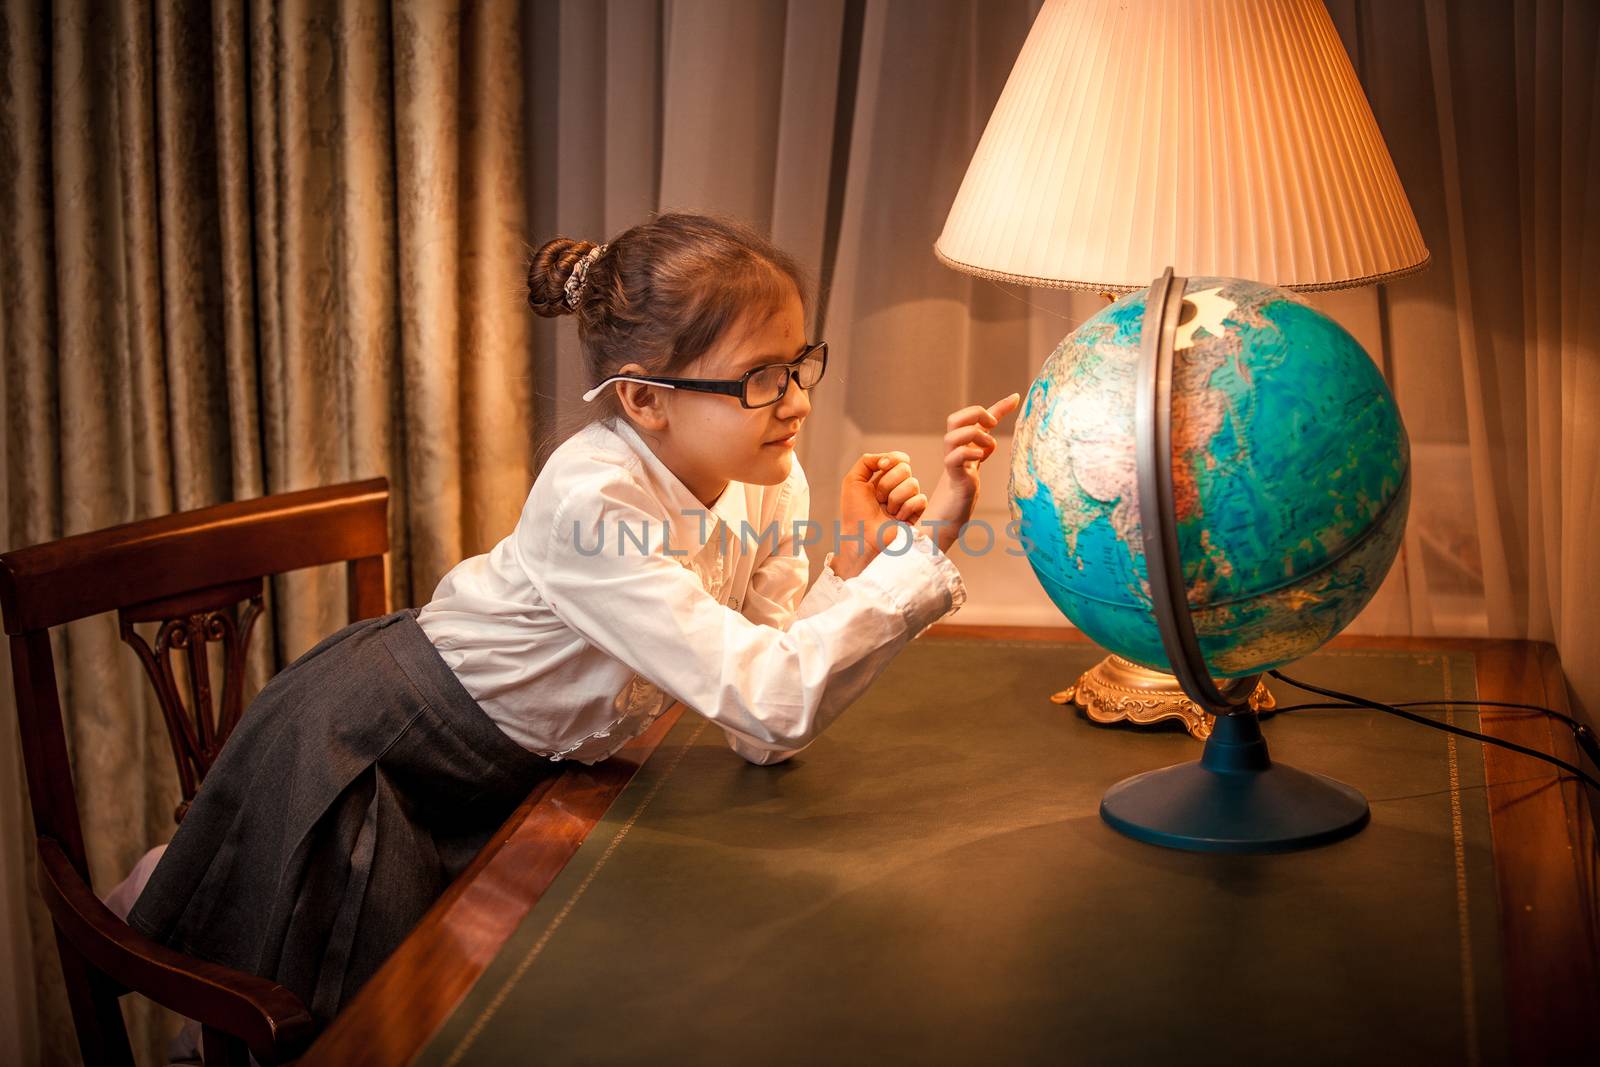 Little girl looking patiently at globe by Kryzhov